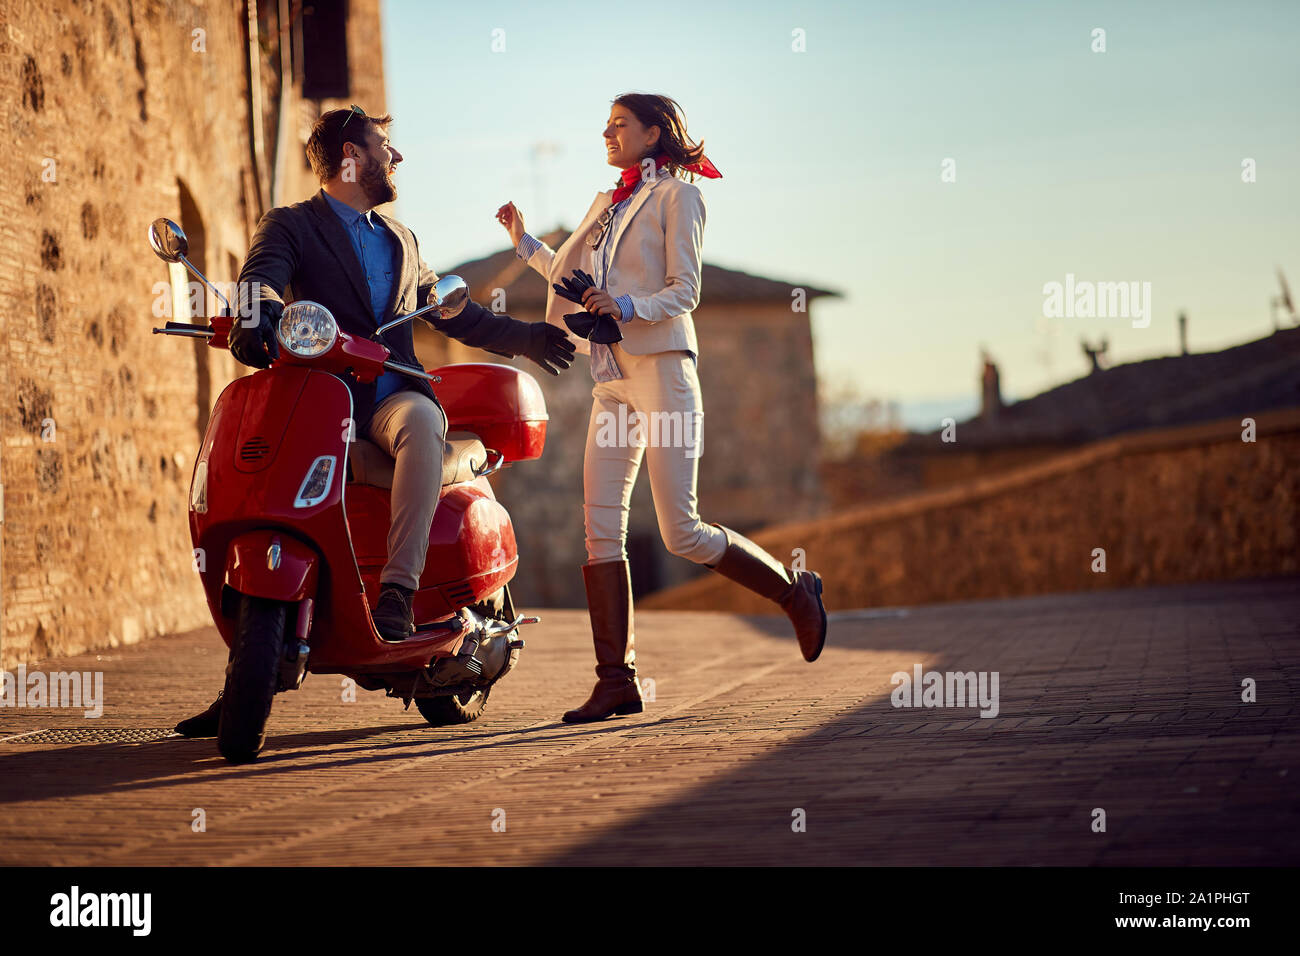 Business people on scooter. scooter in the city. Young Happy couple riding scooter. Stock Photo